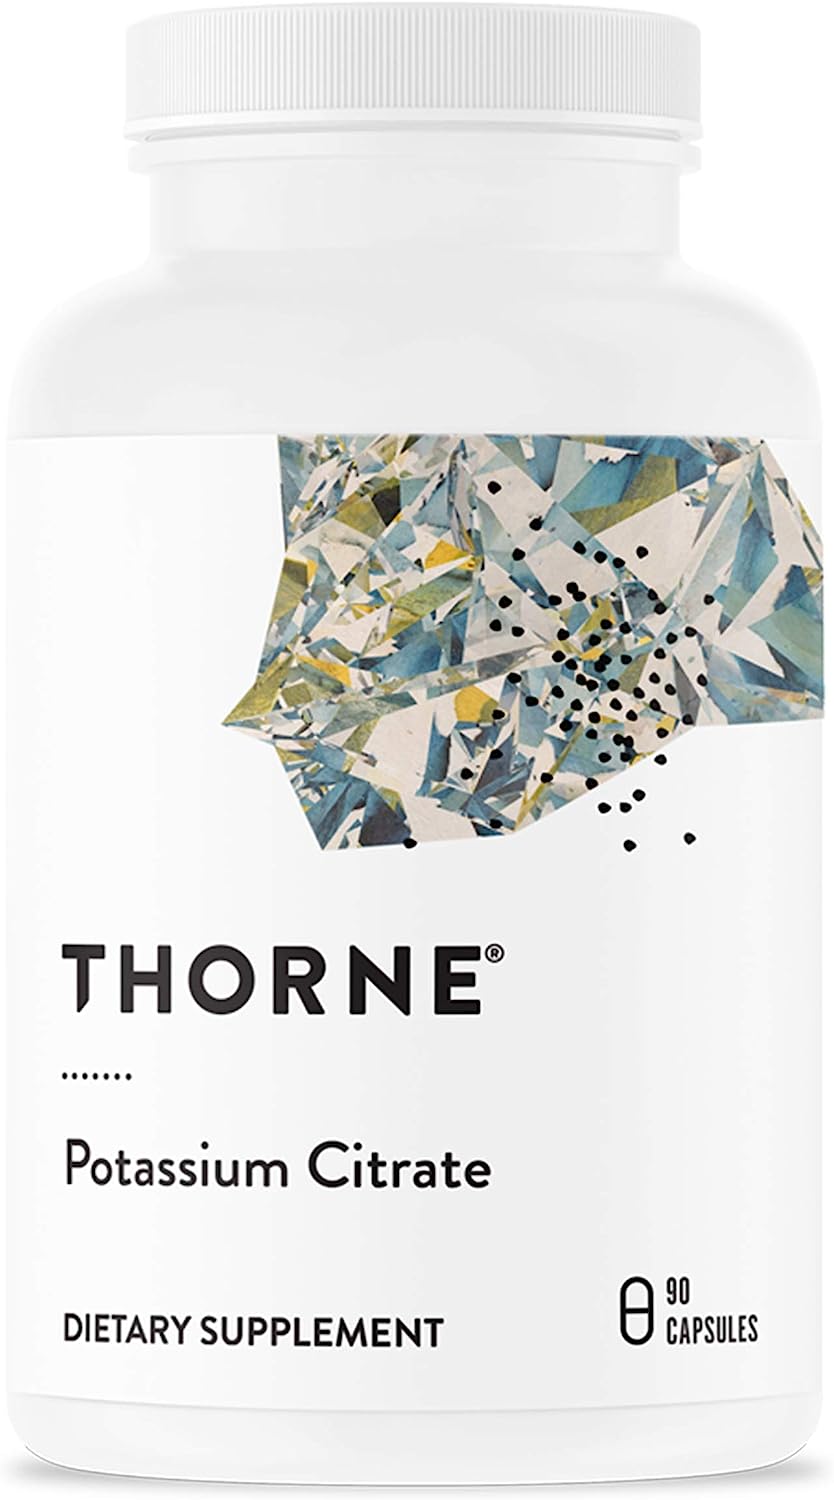 Thorne Potassium Citrate - Highly-Absorbable Potassium Supplement for Kidney, Heart, and Skeletal Support - 90 Capsules